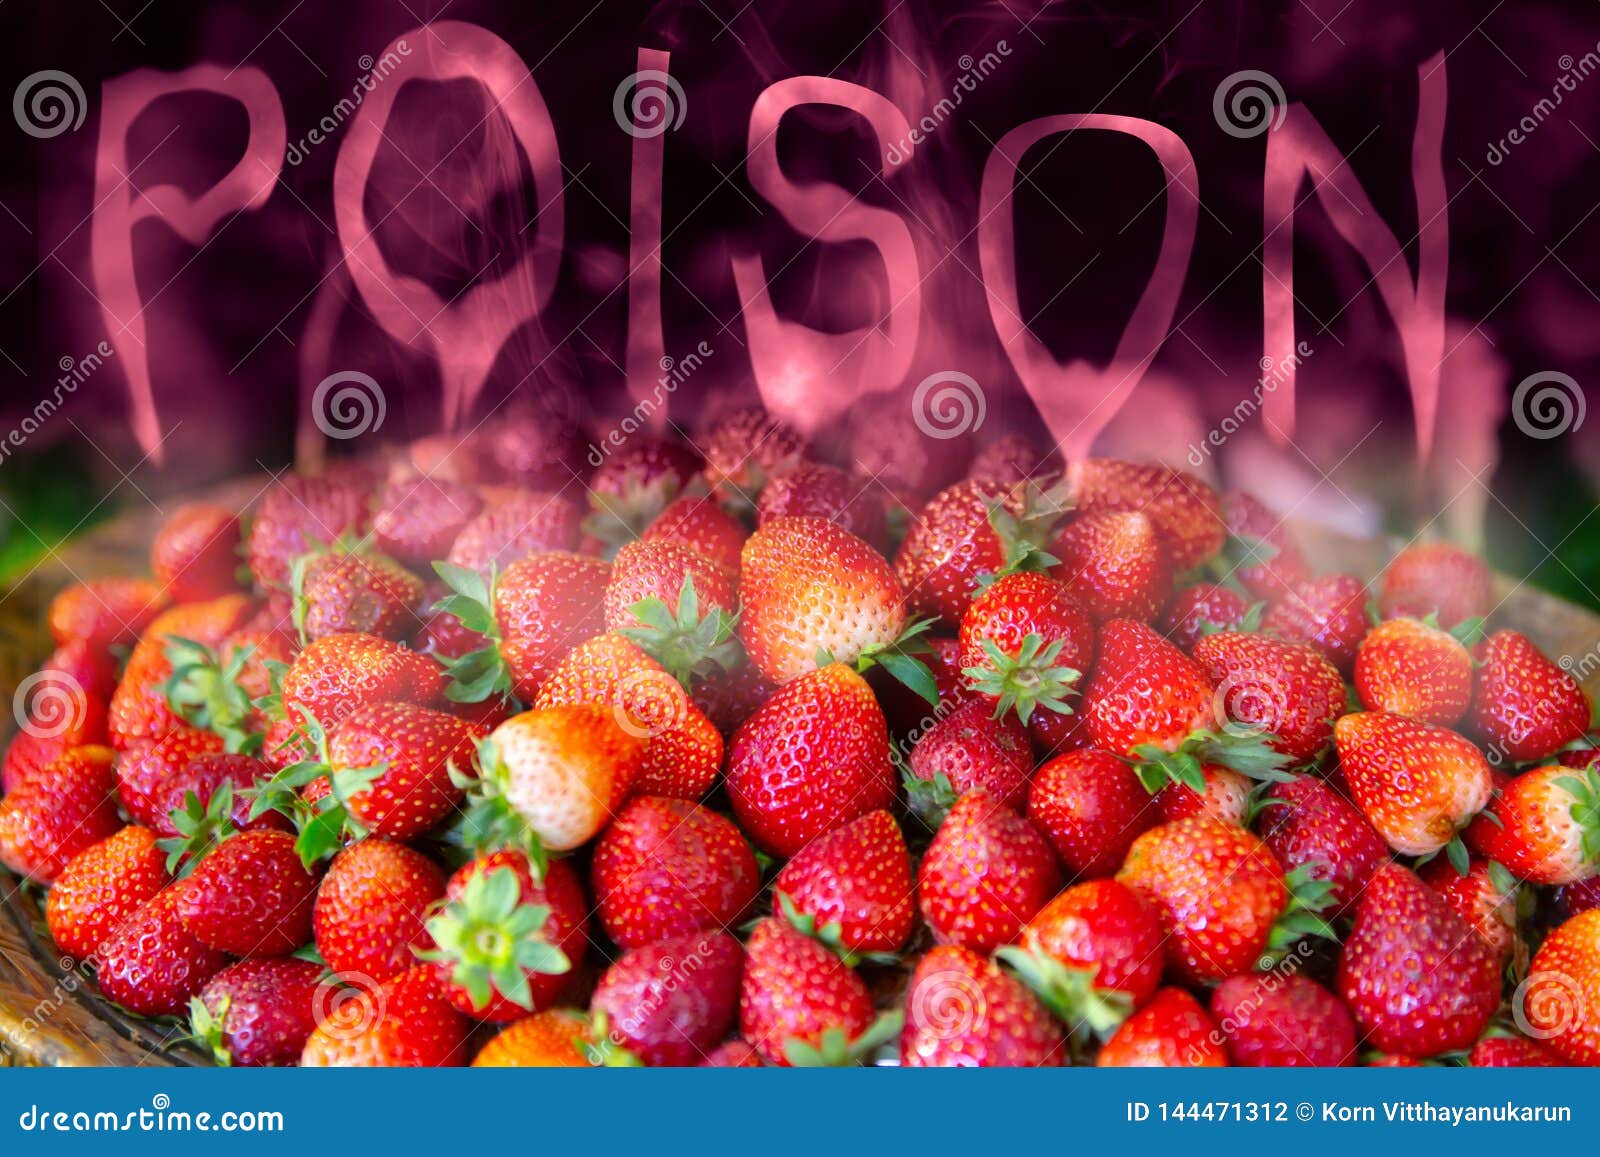 strawberry danger fruit from chemical insecticide and pesticide residues poisonous